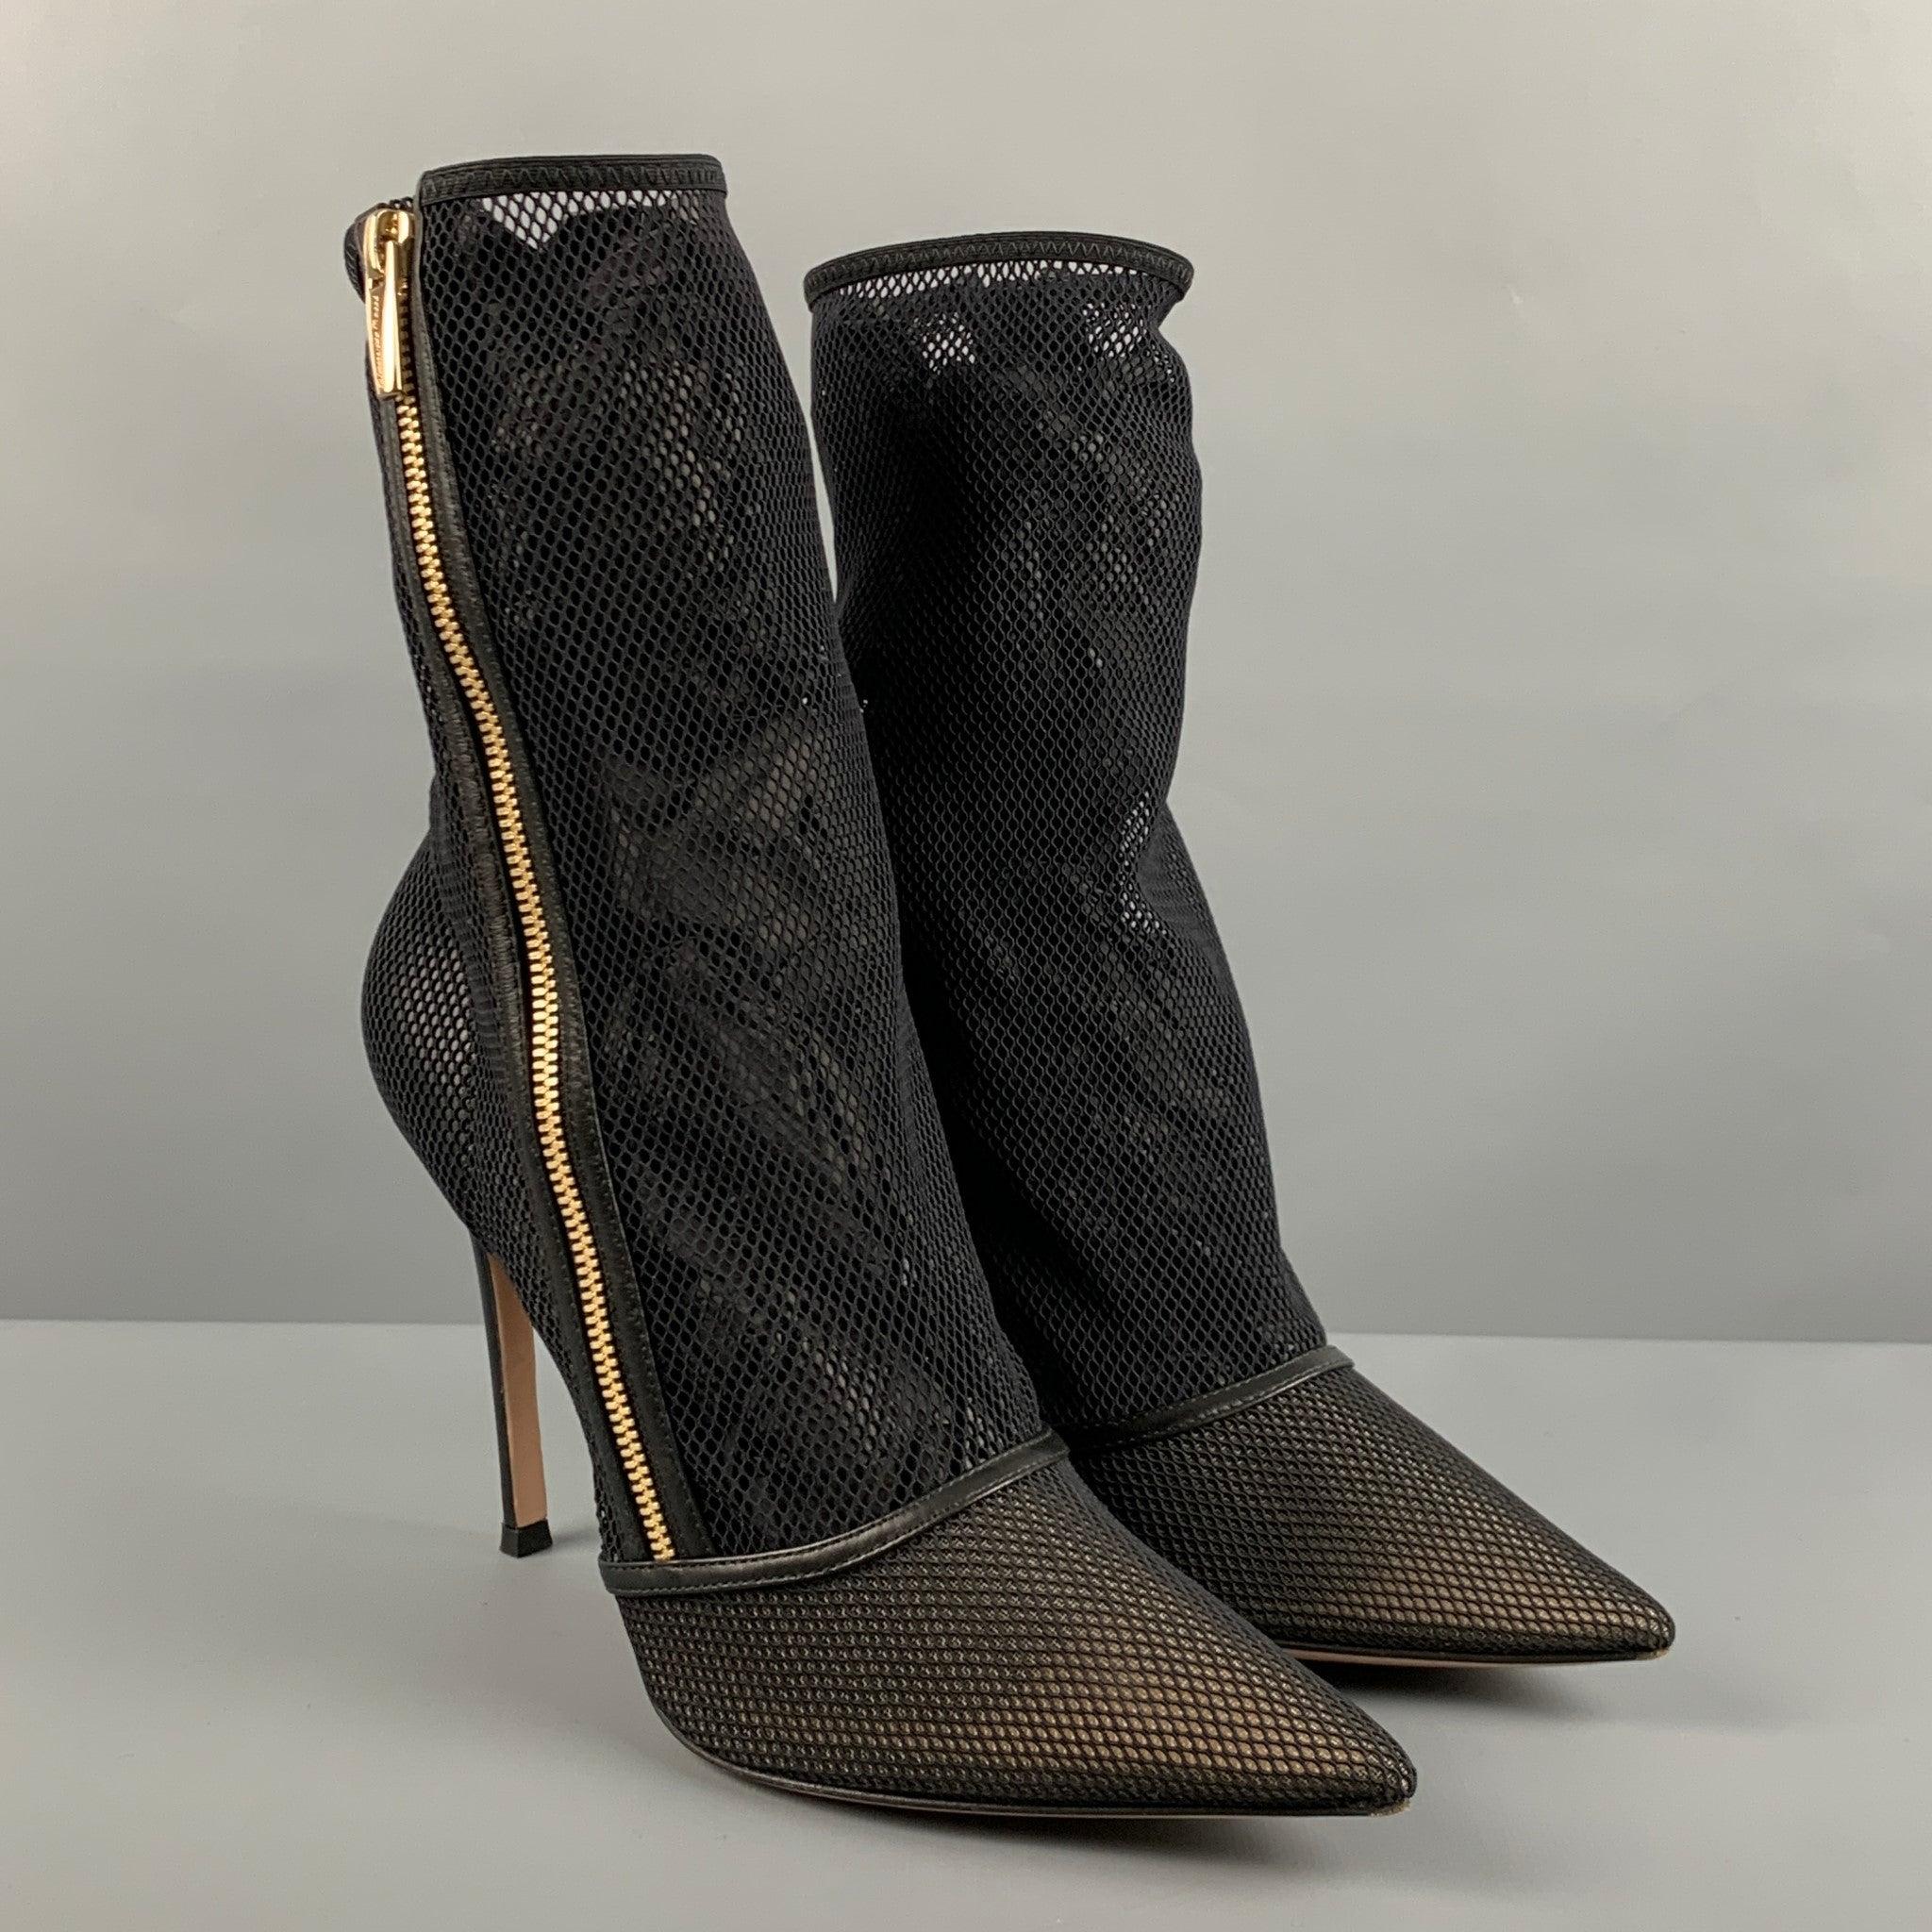 GIANVITO ROSSI ankle boots comes in a black mesh material featuring a pointed toe, side zipper closure, and a stiletto heel. Comes with box. Made in Italy.Very Good Pre-Owned Condition. Minor signs of wear. 

Marked:   39.5 

Measurements: 
  Heel: